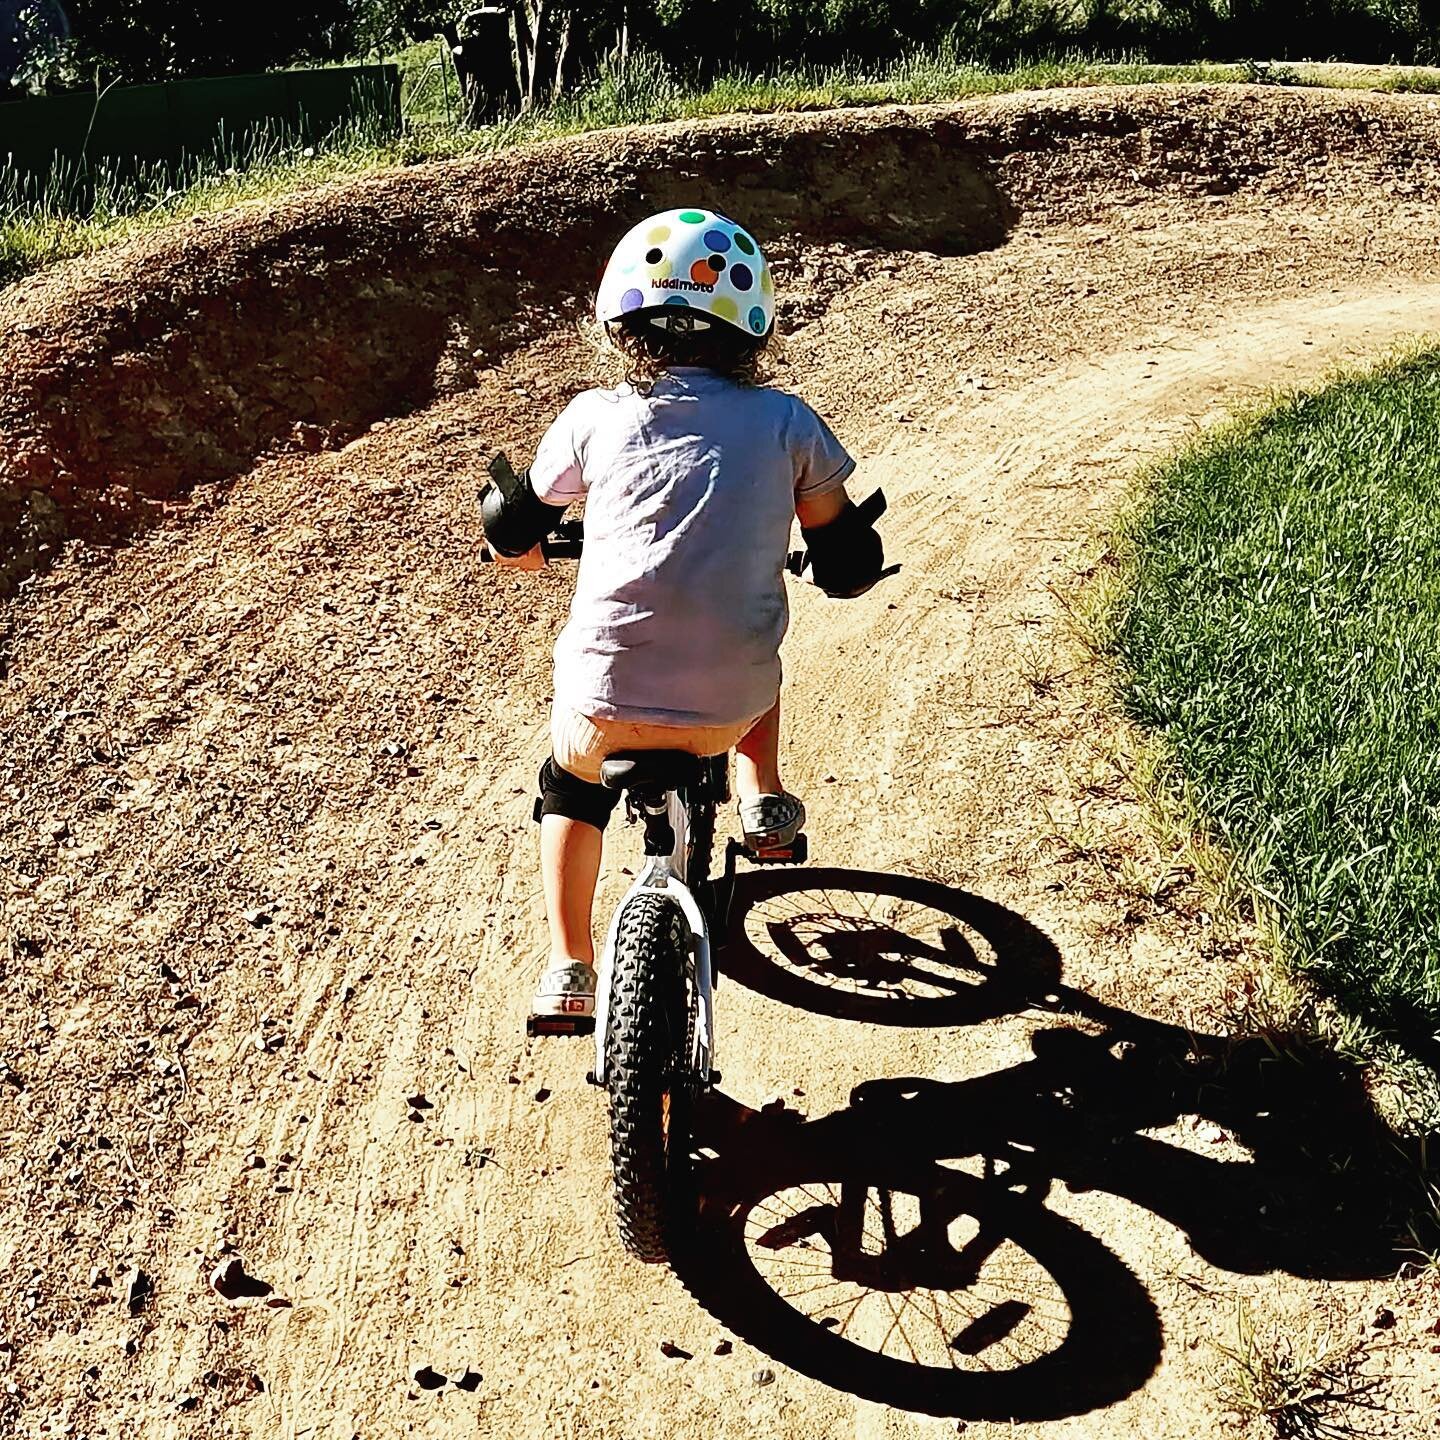 A revamp to the exisiting BMX track on William St Would be a great investment for our local youth and families.